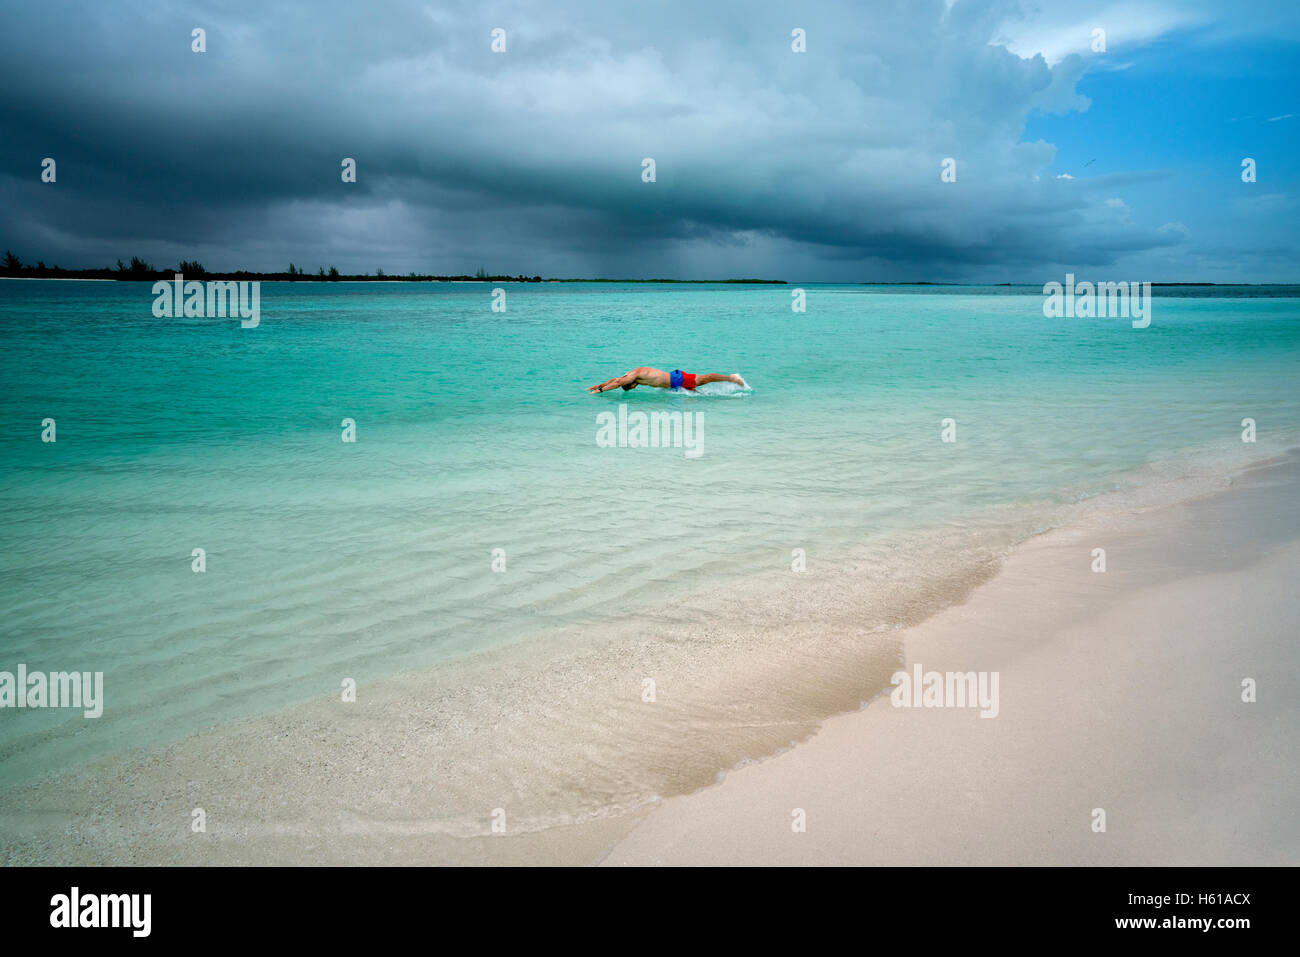 Man diving in water with storm clouds over ocean at Turks and Caicos. Stock Photo